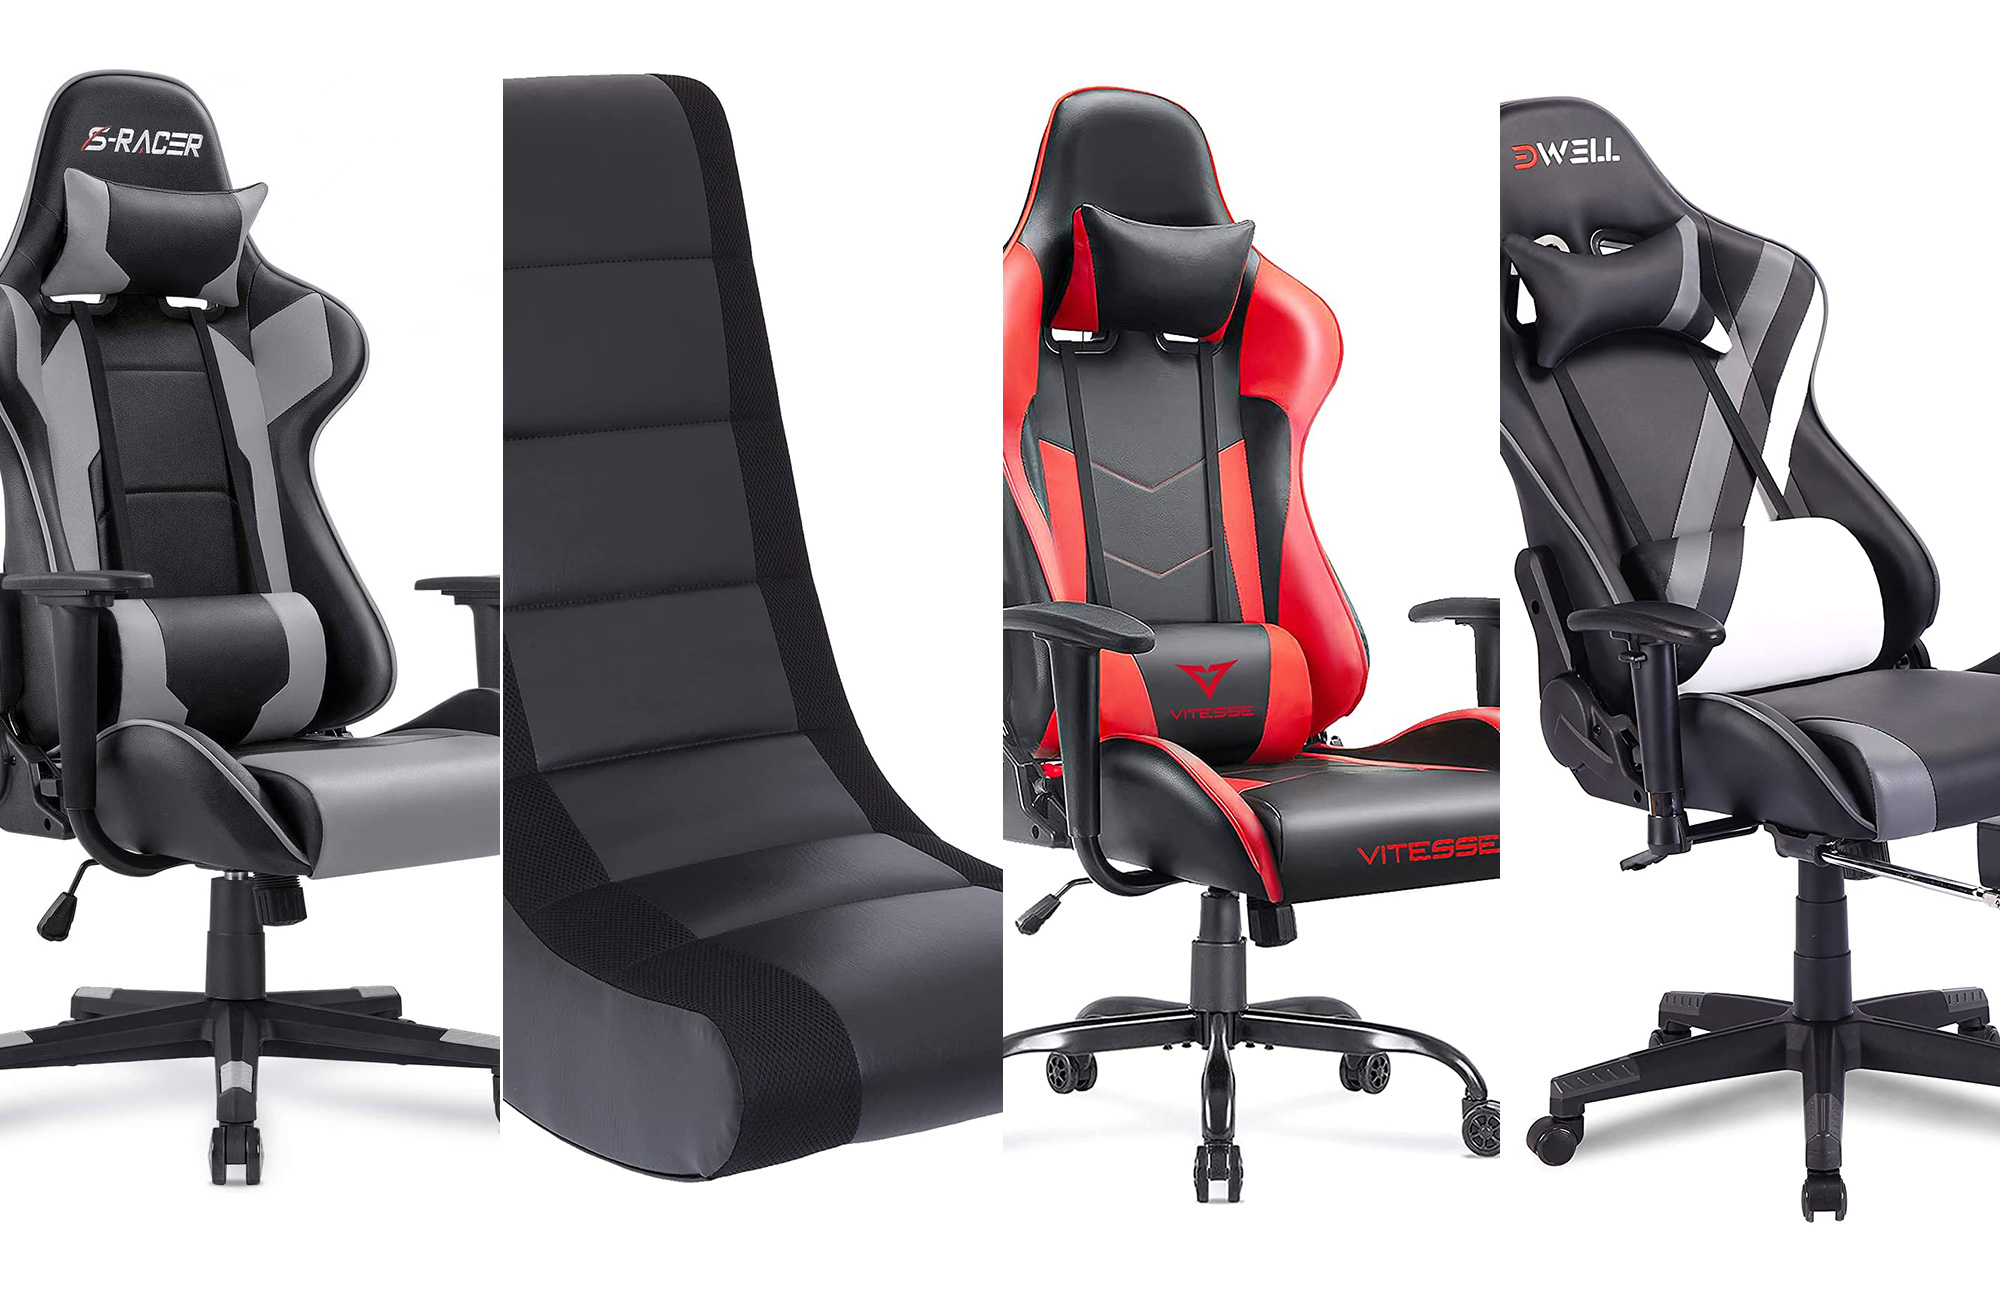 The best gaming chairs under $100 composited